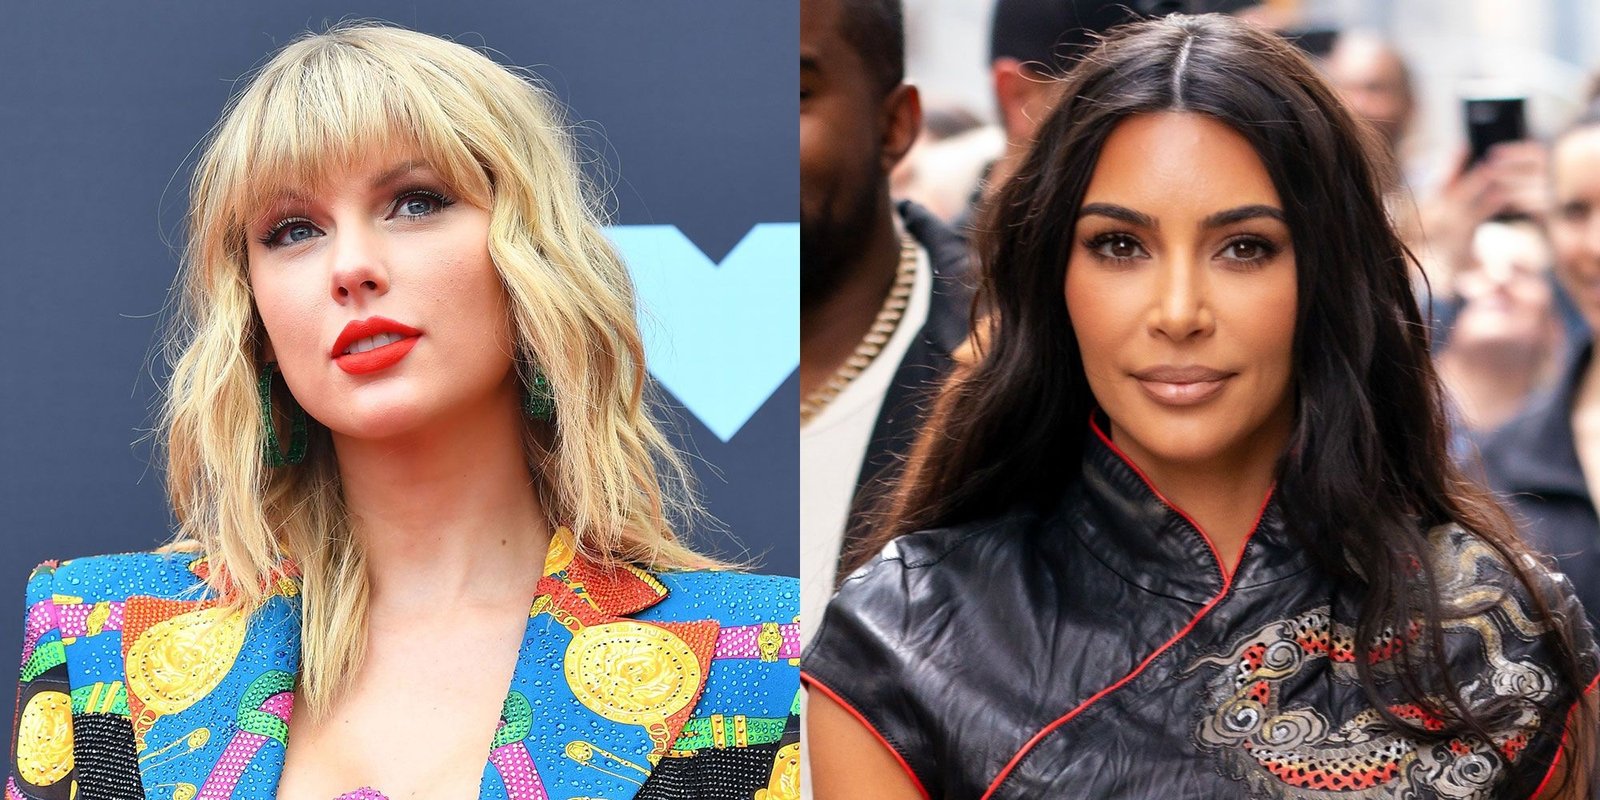 Taylor Swift Firmly Responds to Kim Kardashian: 'I'm Focused on My Peace and Business, Please Respect My Privacy